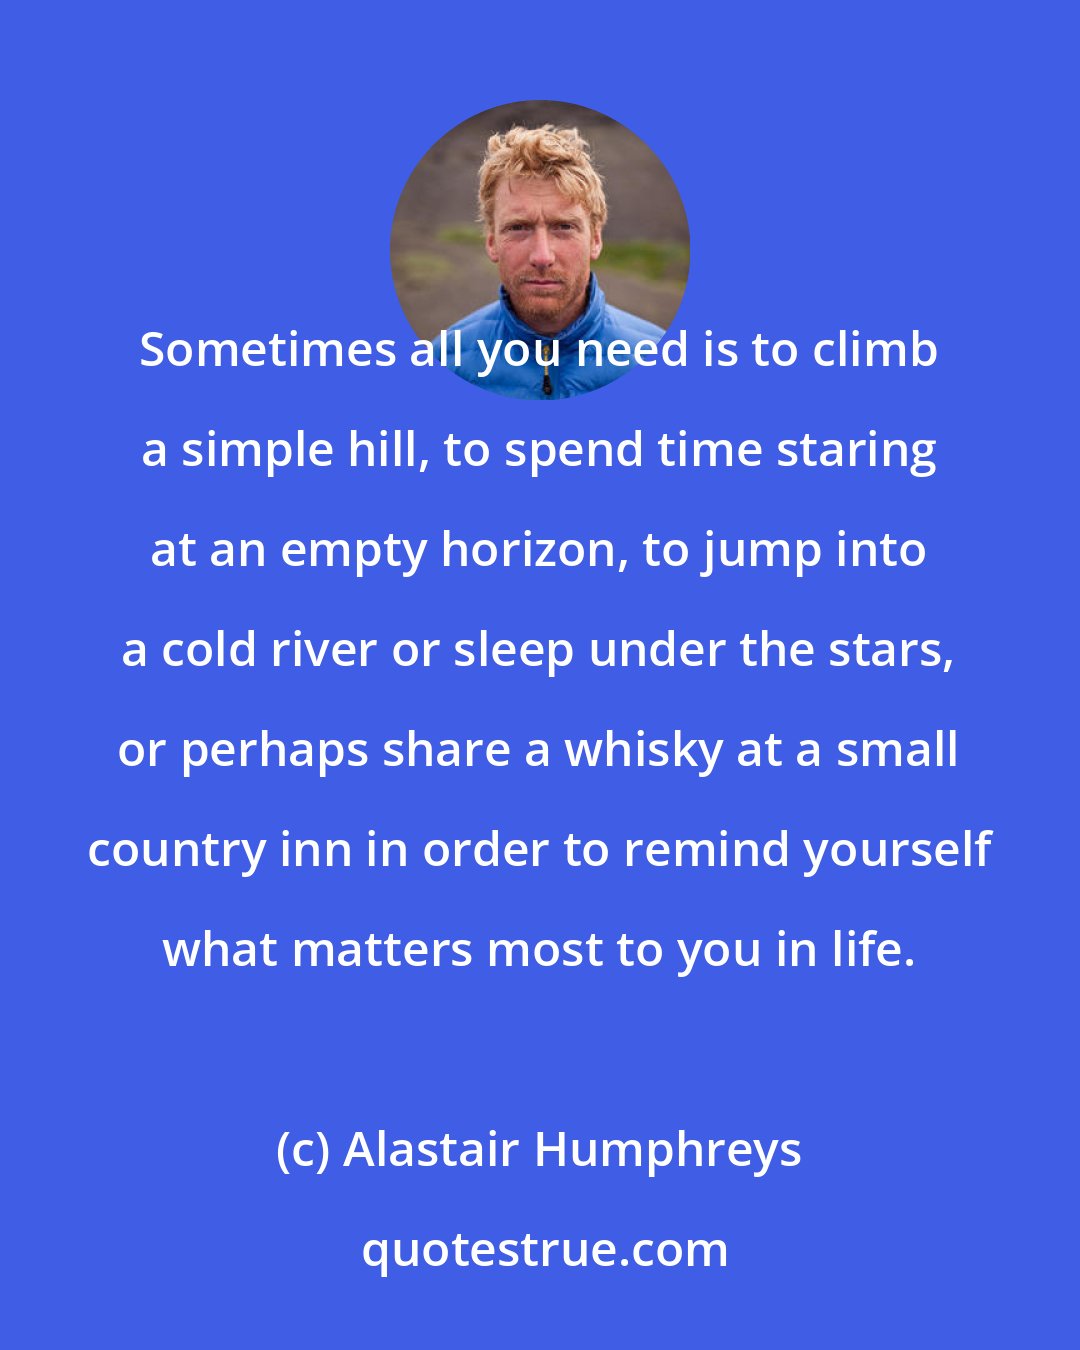 Alastair Humphreys: Sometimes all you need is to climb a simple hill, to spend time staring at an empty horizon, to jump into a cold river or sleep under the stars, or perhaps share a whisky at a small country inn in order to remind yourself what matters most to you in life.